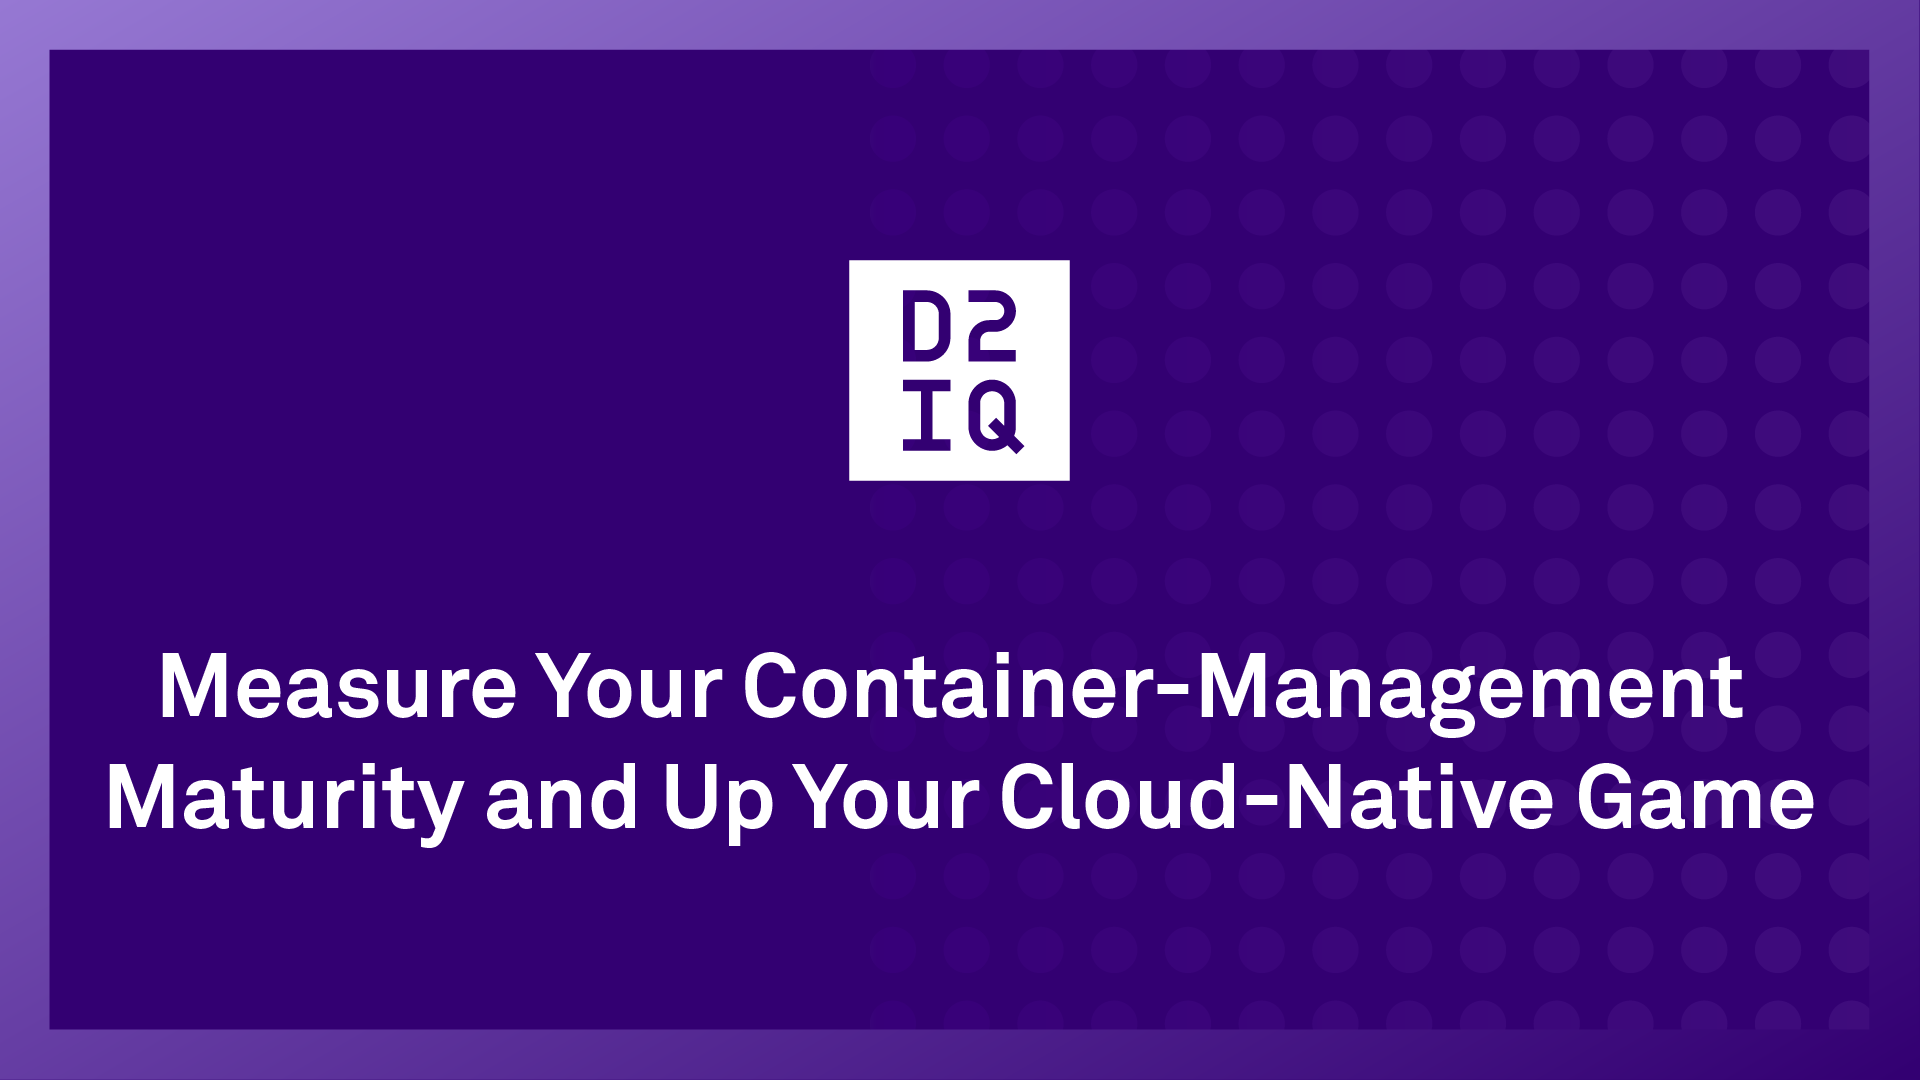 Measure Your Container-Management Maturity and Up Your Cloud-Native Game